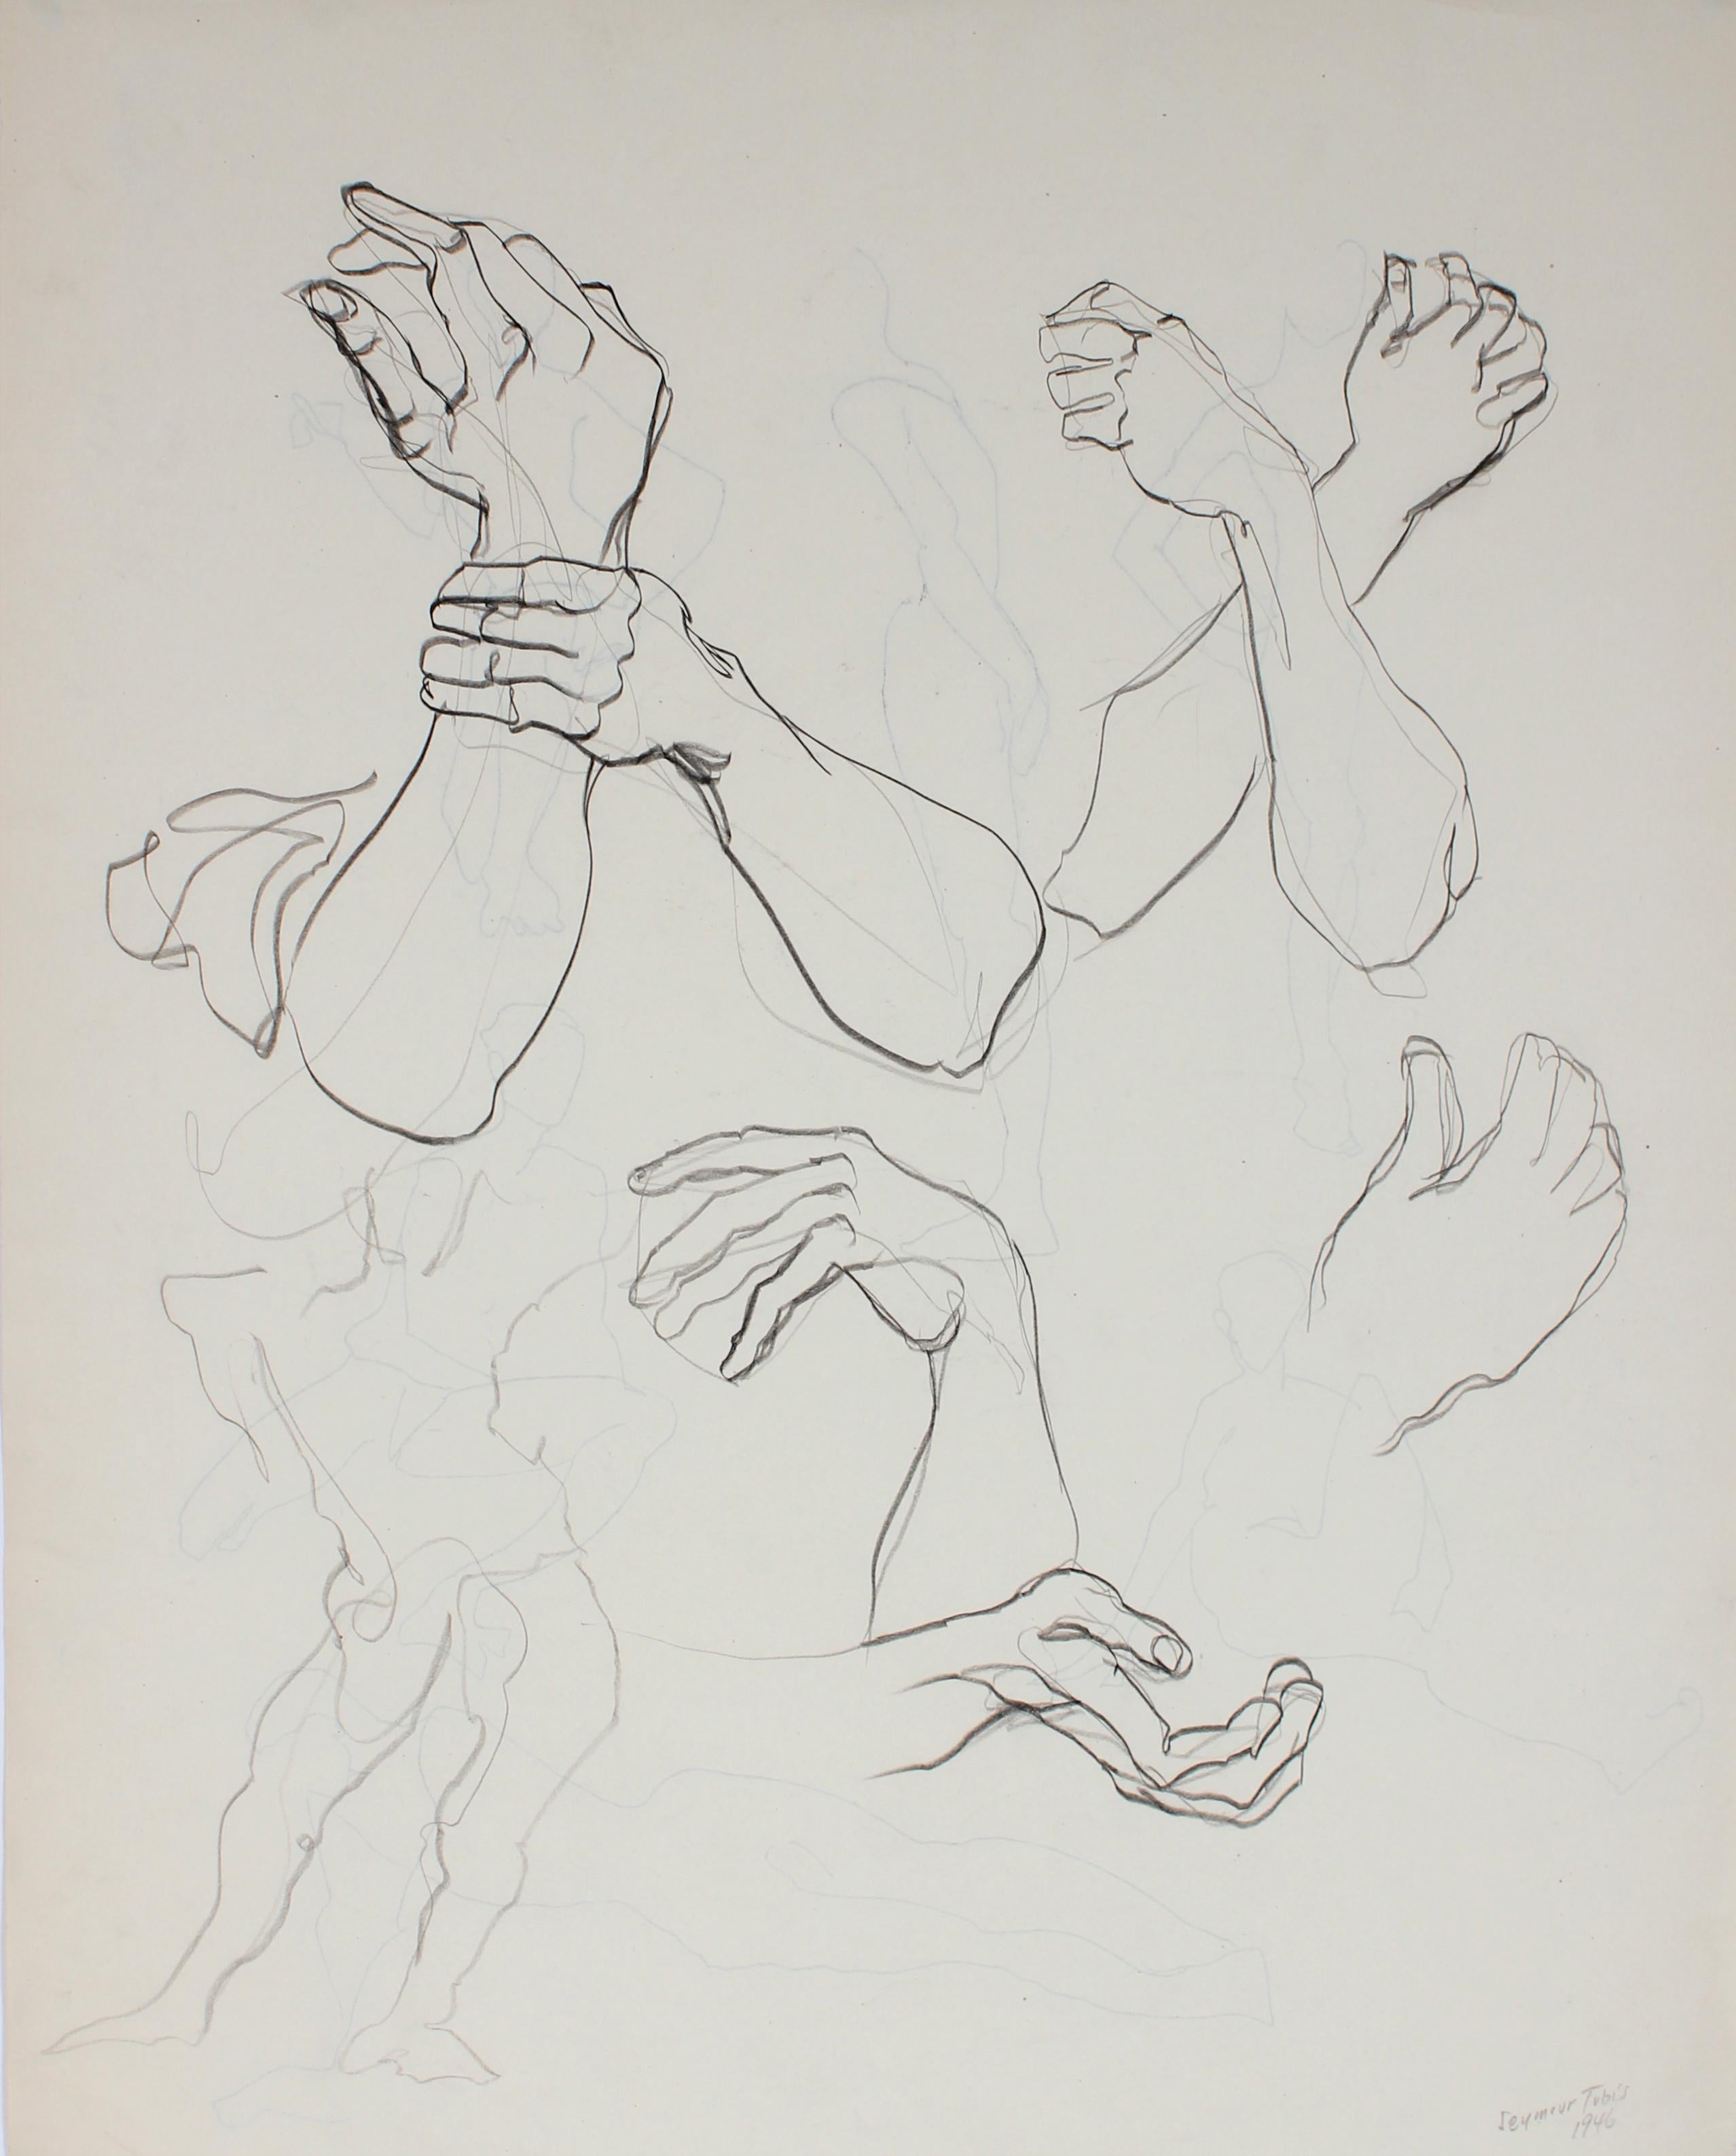 Seymour Tubis Figurative Art - Anatomical Study of Wrists & Hands 1946 Ink and Graphite on Paper